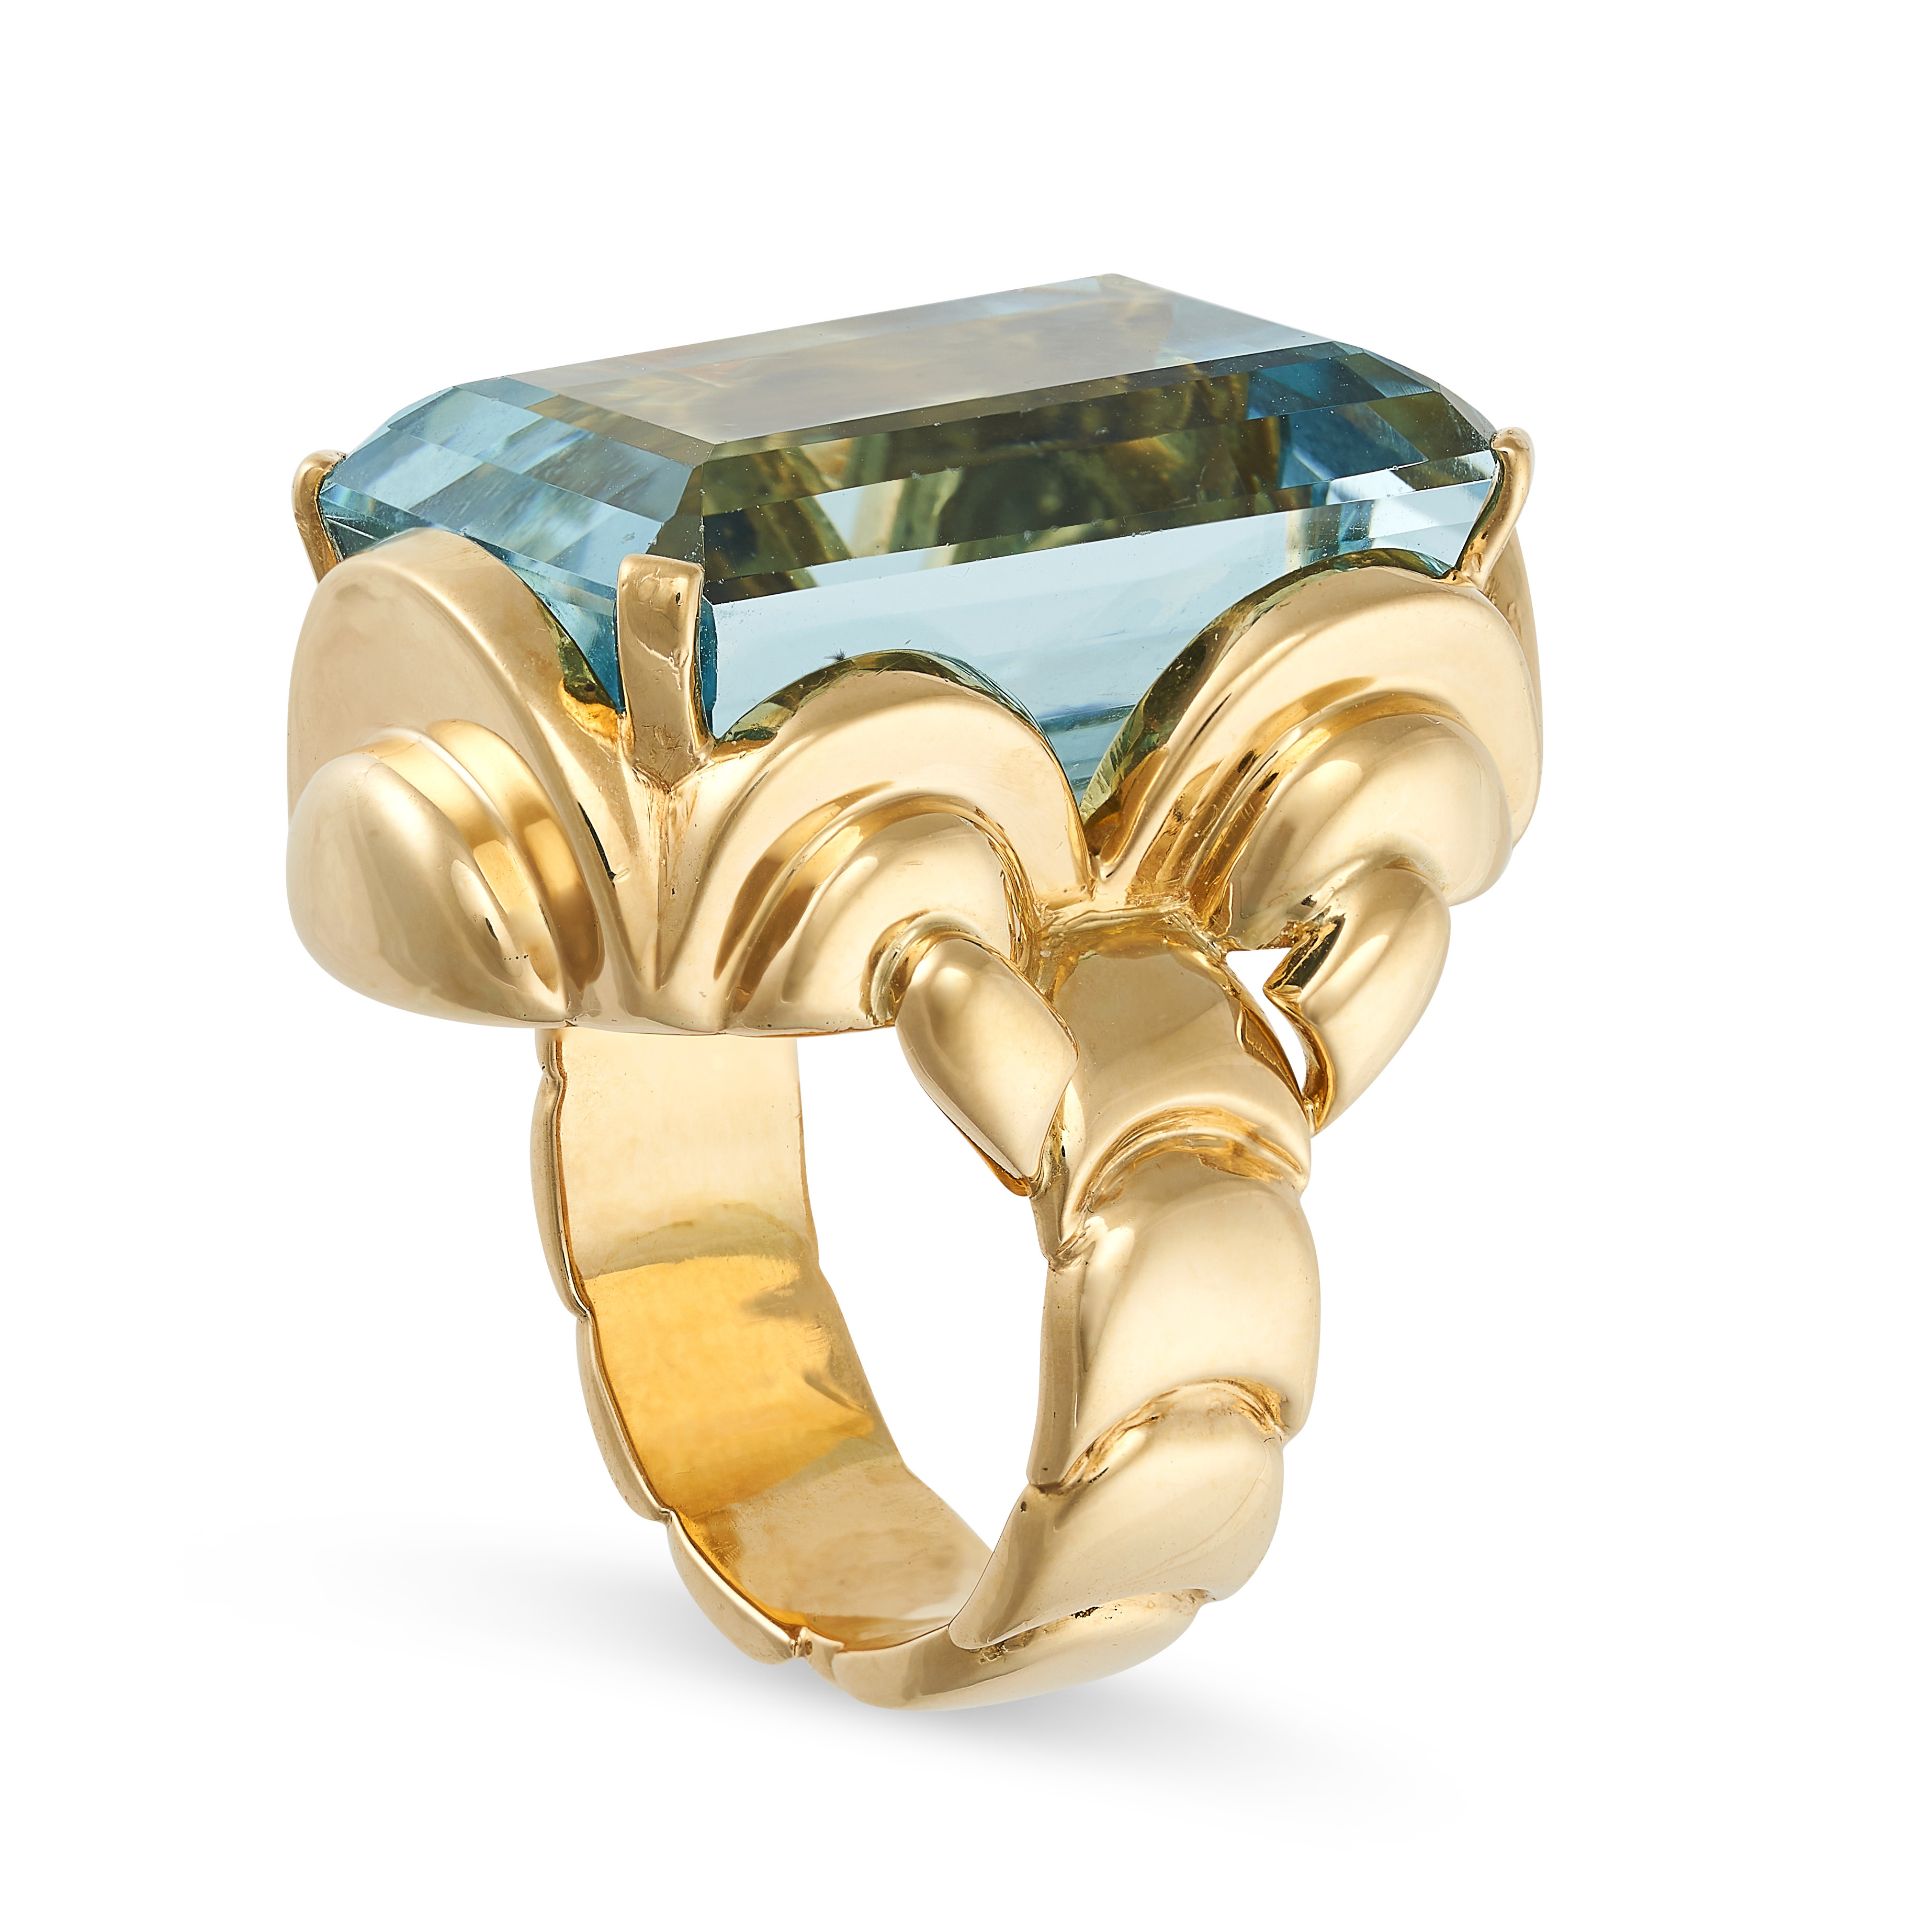 AN AQUAMARINE DRESS RING in 18ct yellow gold, set with an octagonal step cut emerald of - Image 2 of 2